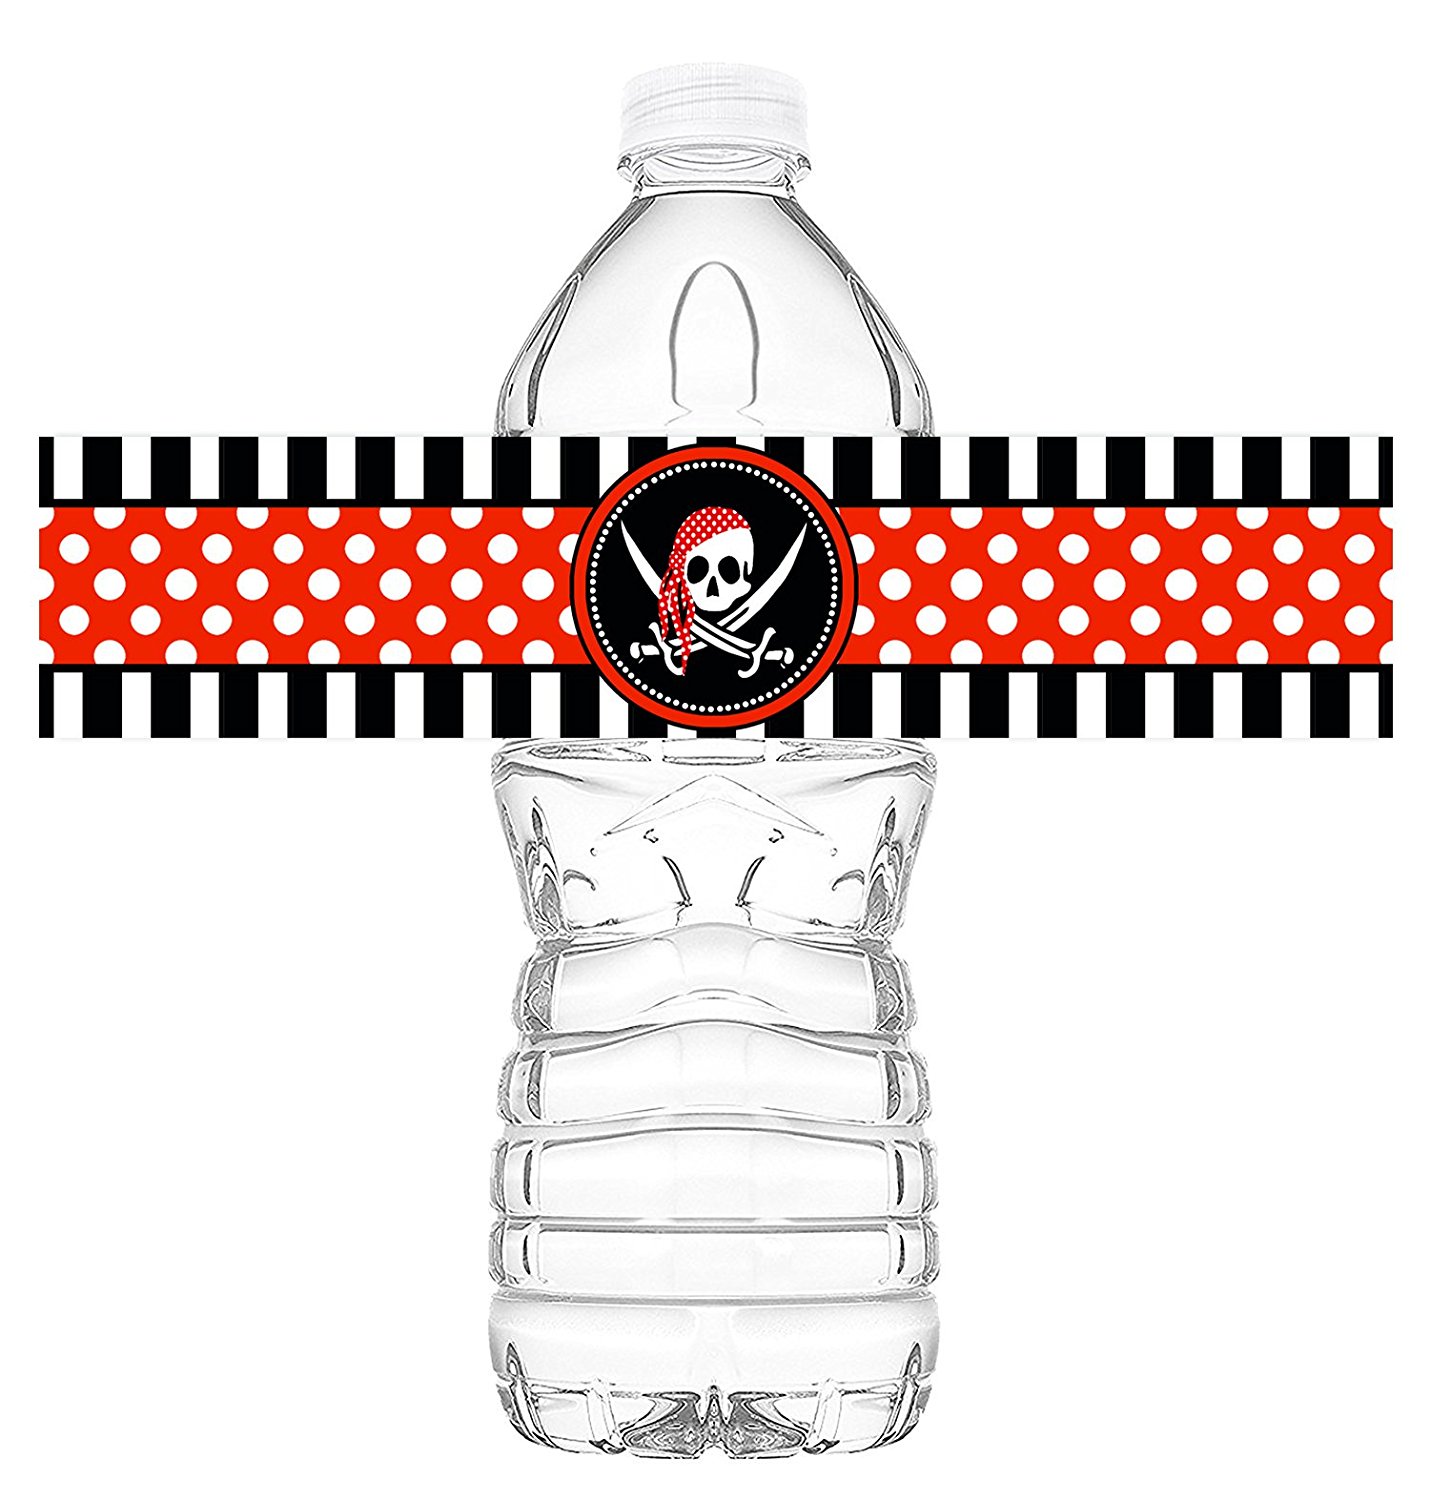 https://poppartiesink.com/wp-content/uploads/imported/Pirate-Bottle-Wraps-20-Pirate-Water-Bottle-Labels-Pirate-Decorations-Made-in-the-USA-B075TJCNKG.jpg